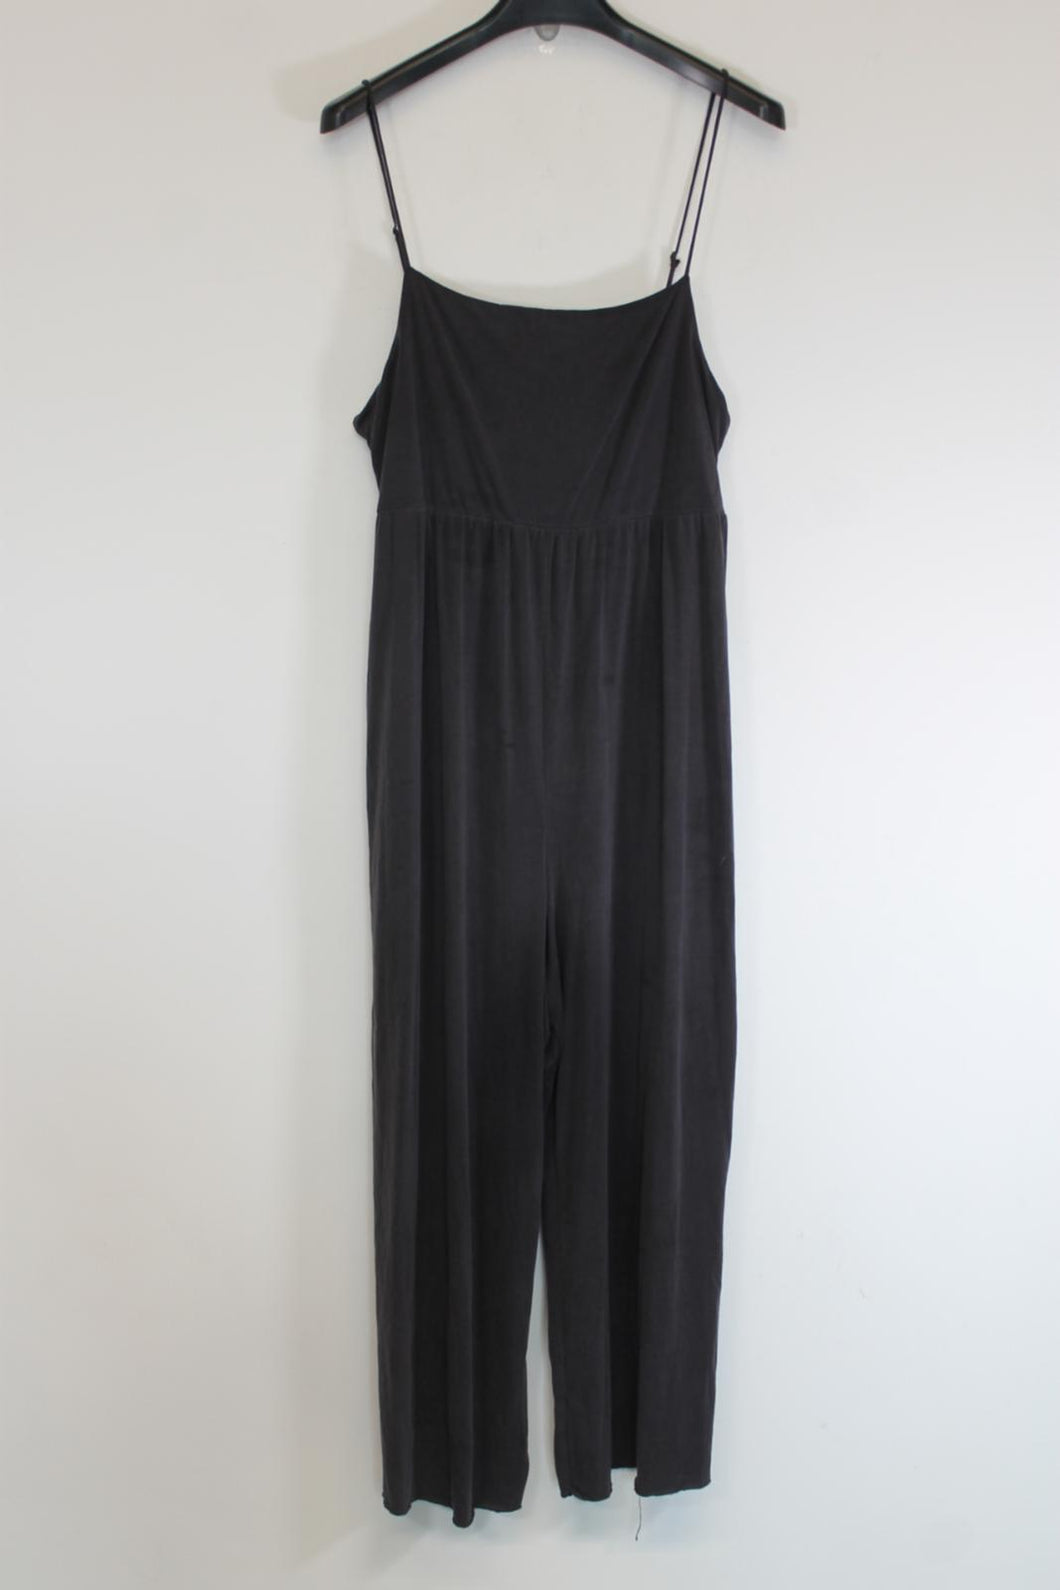 URBAN OUTFITTERS Ladies Dark Grey Modal Sleeveless Jumpsuit Size L